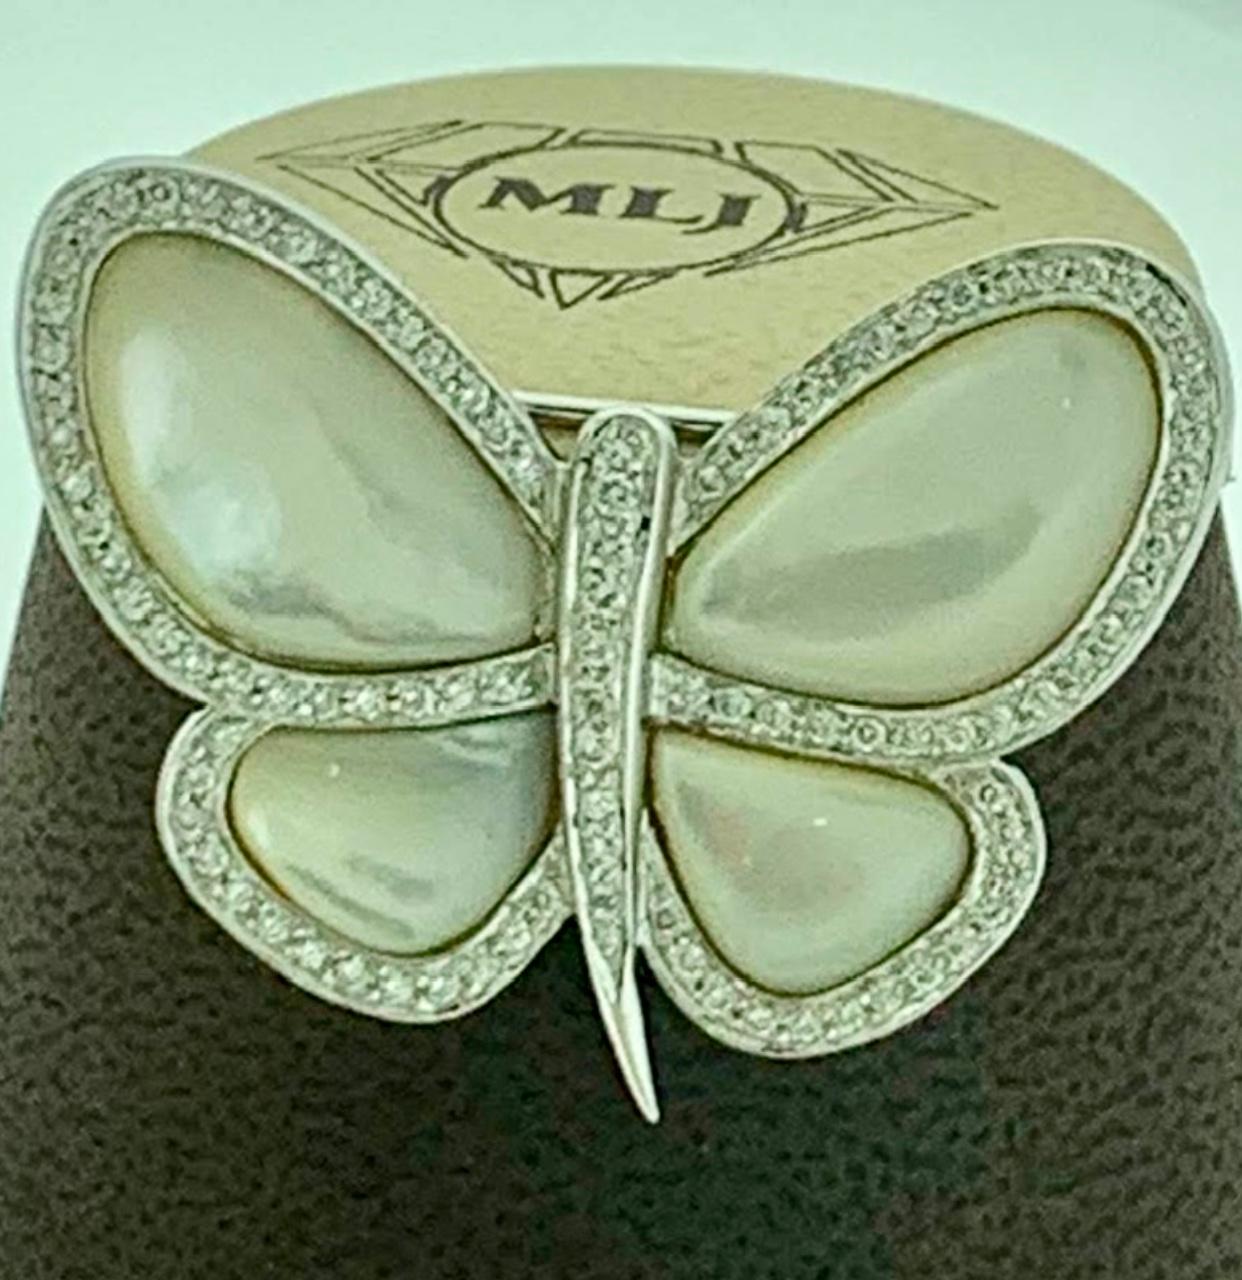 Round Cut 1.0 Carat Diamond and Mother of Pearl Butterfly Broach 18 Karat White Gold 13 Gm